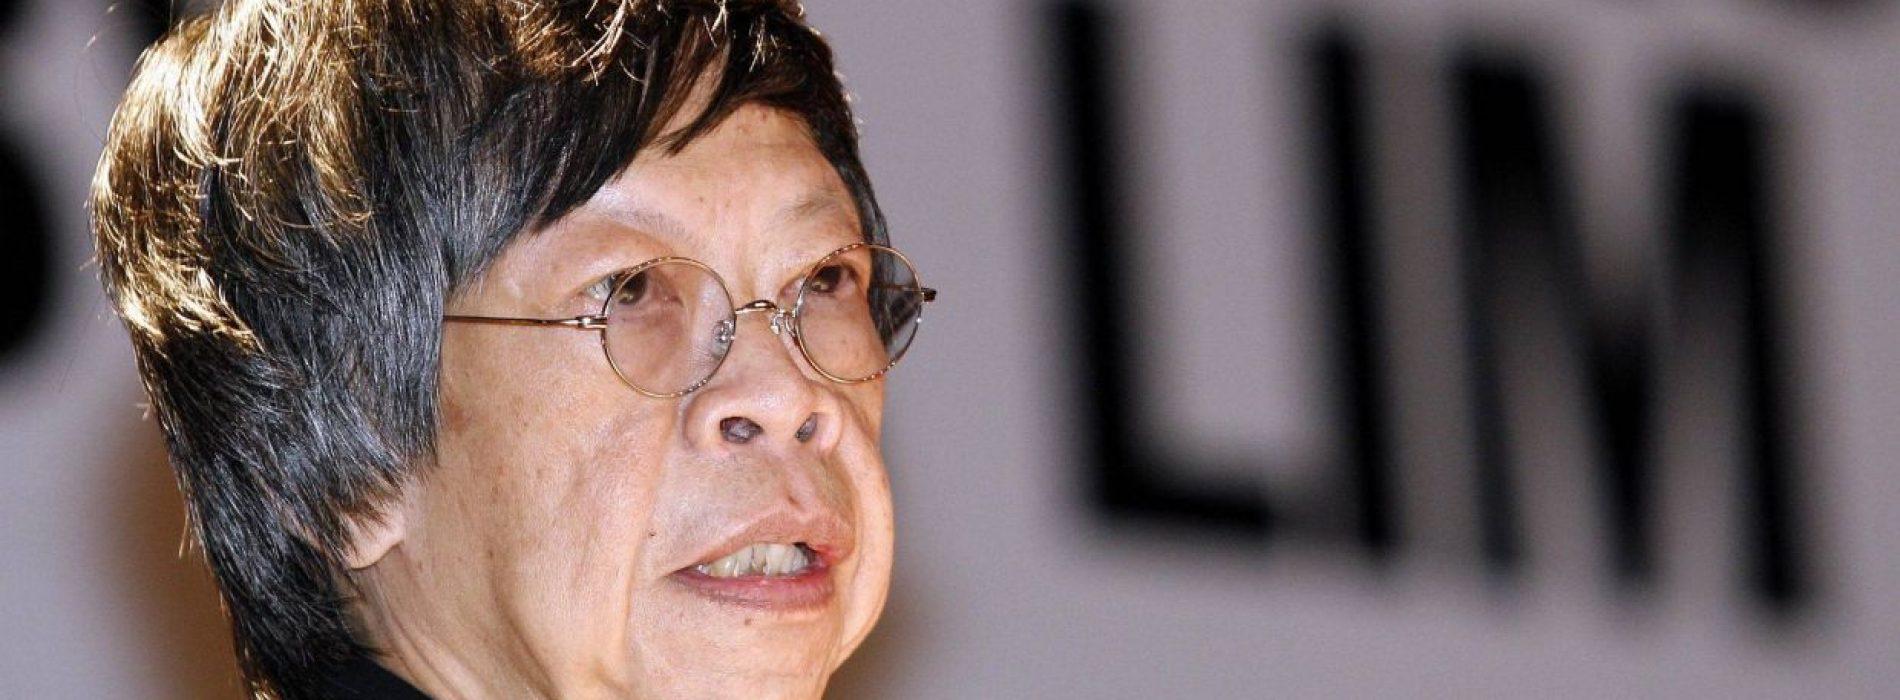 Dr Lim Kok Wing mourned